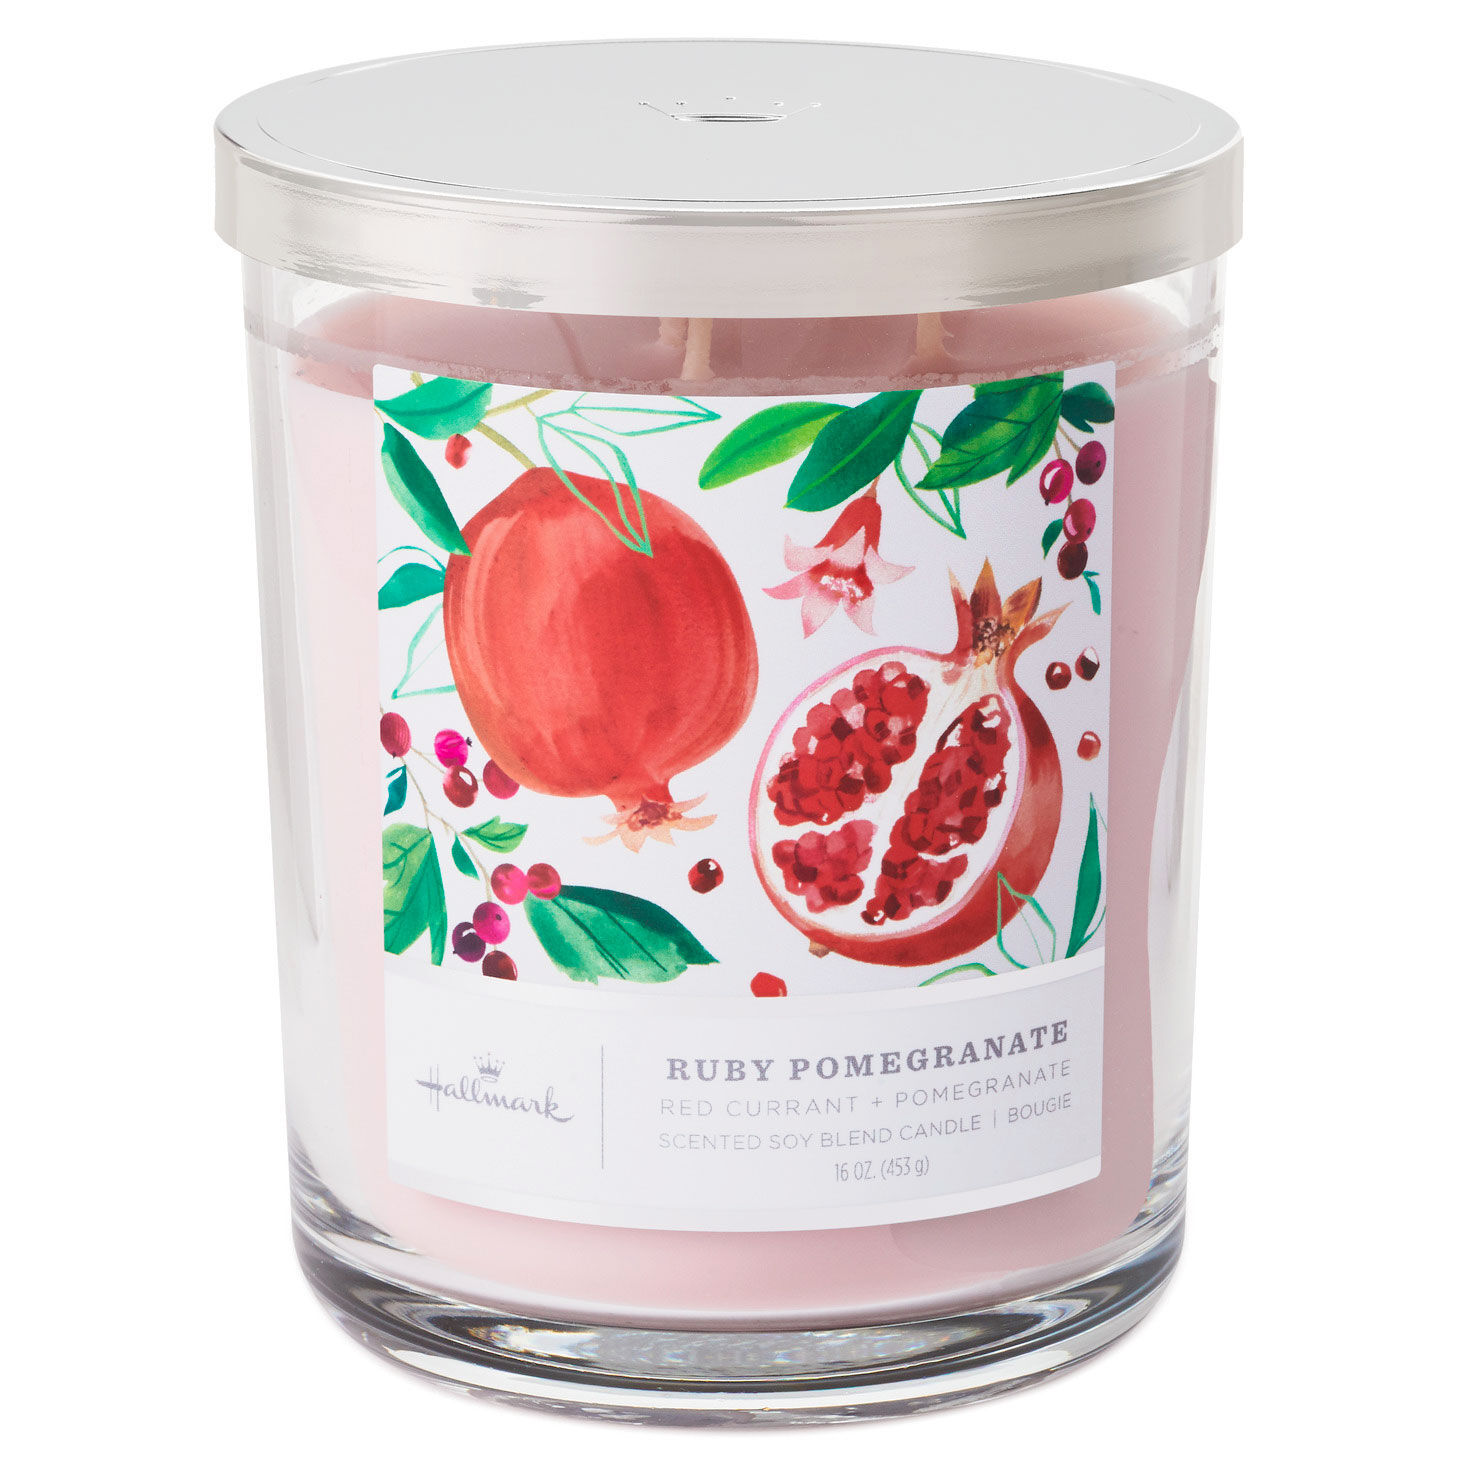 8 Oz. VALENTINES DAY Candle "Love" Pomegranate Jar Candle 